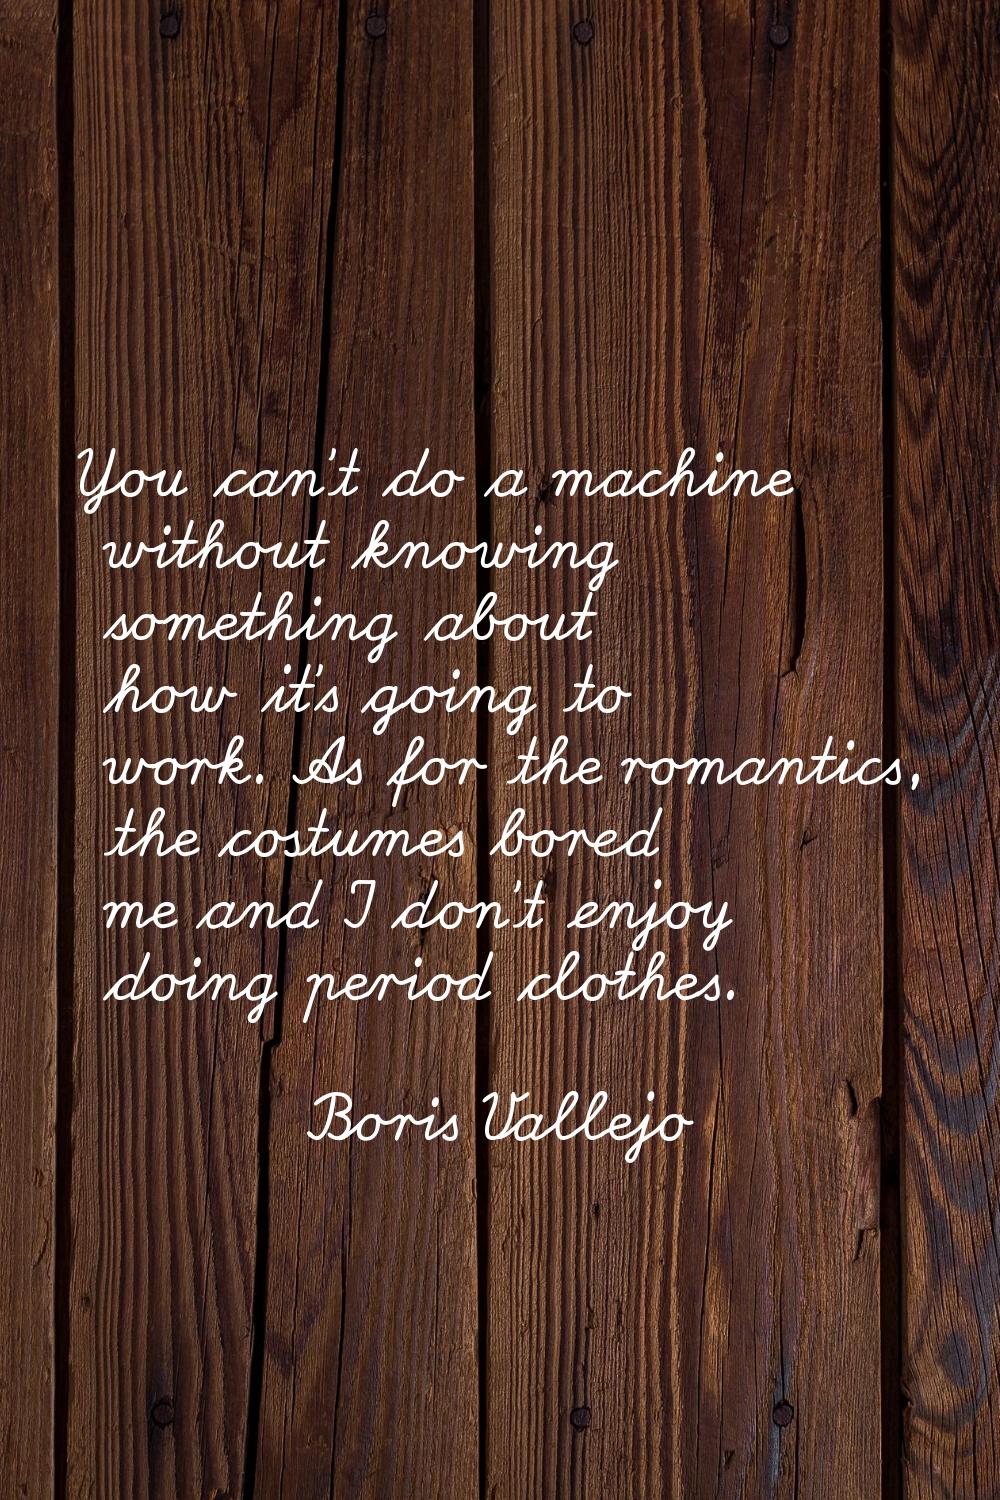 You can't do a machine without knowing something about how it's going to work. As for the romantics